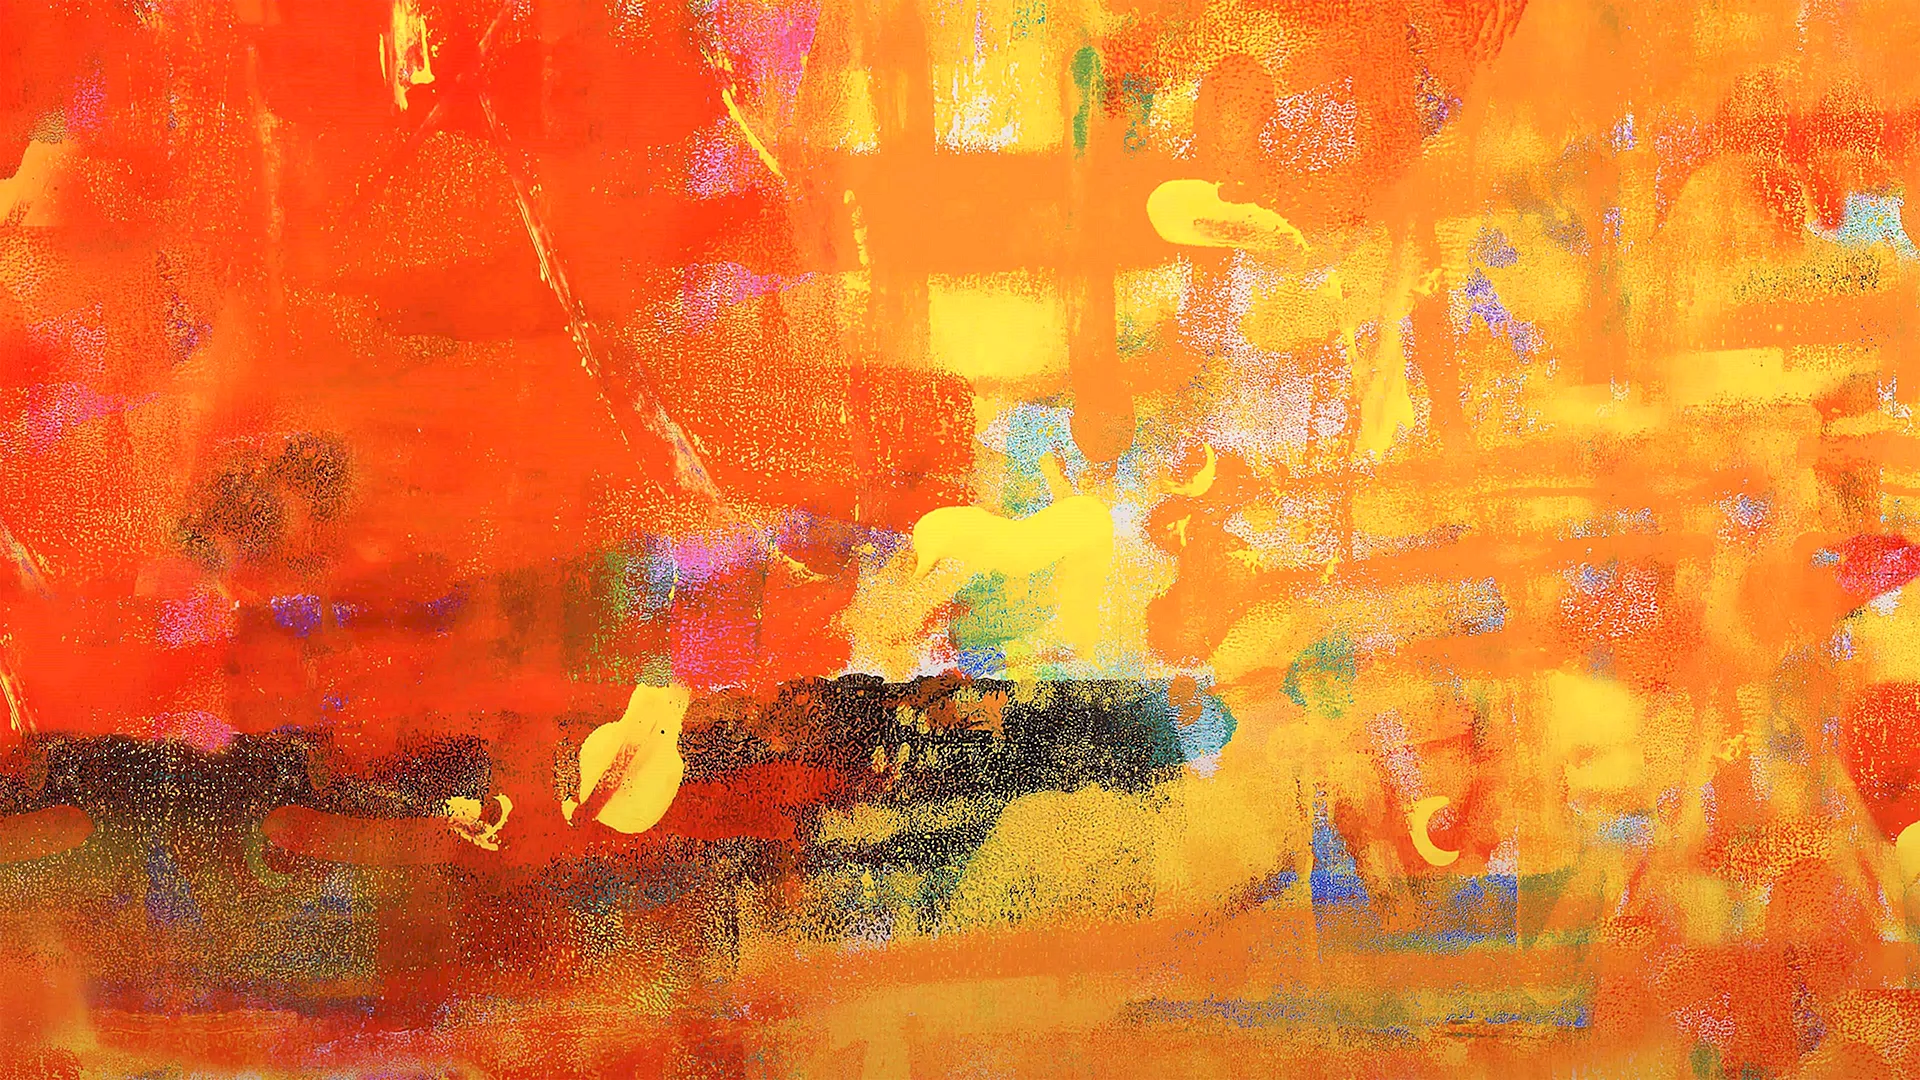 Abstract Orange Painting Wallpaper